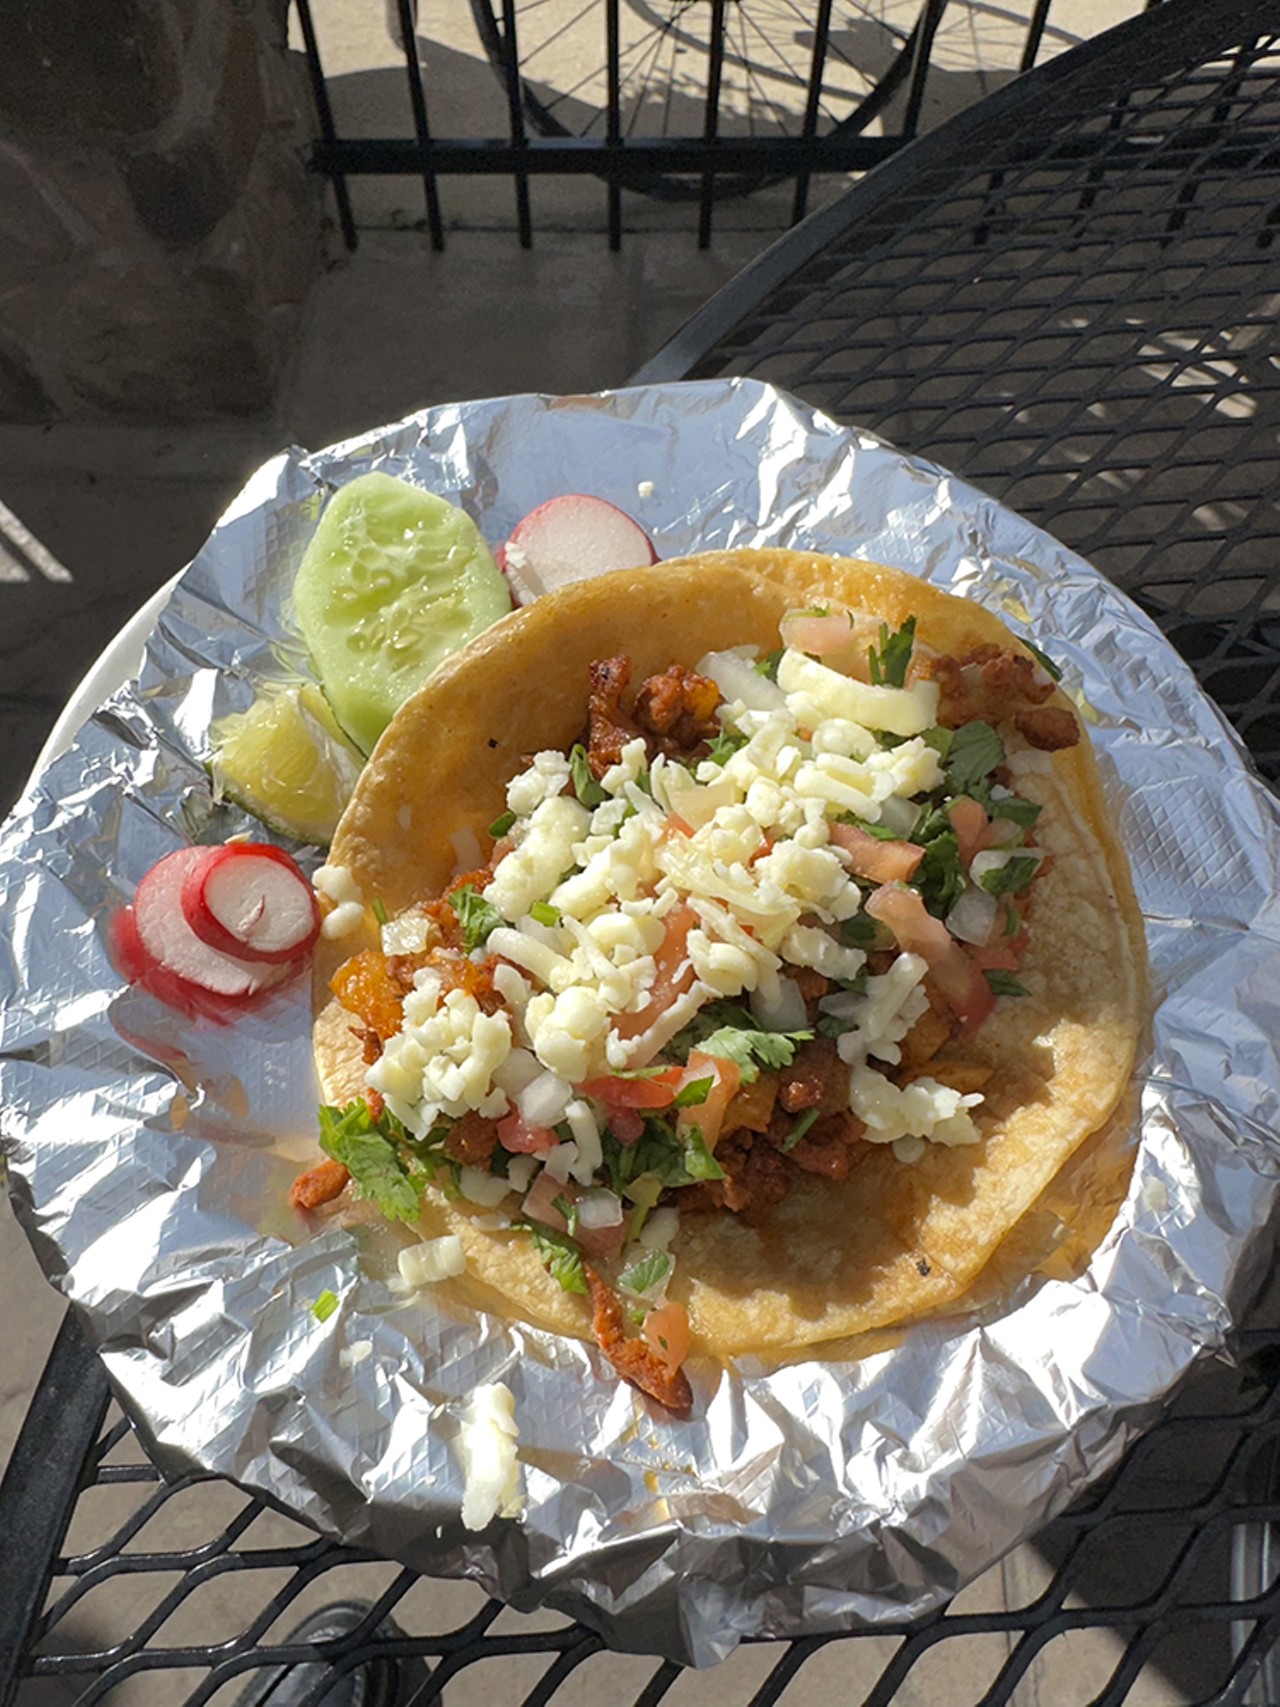 El Taco Veloz
7 Martin Luther King Dr., Corryville
Taco Veloz: Here you have a soft shelled corn tortilla which has Marinated pork as well as pineapple topped with onion, cilantro, pico de gallo, and cheese.